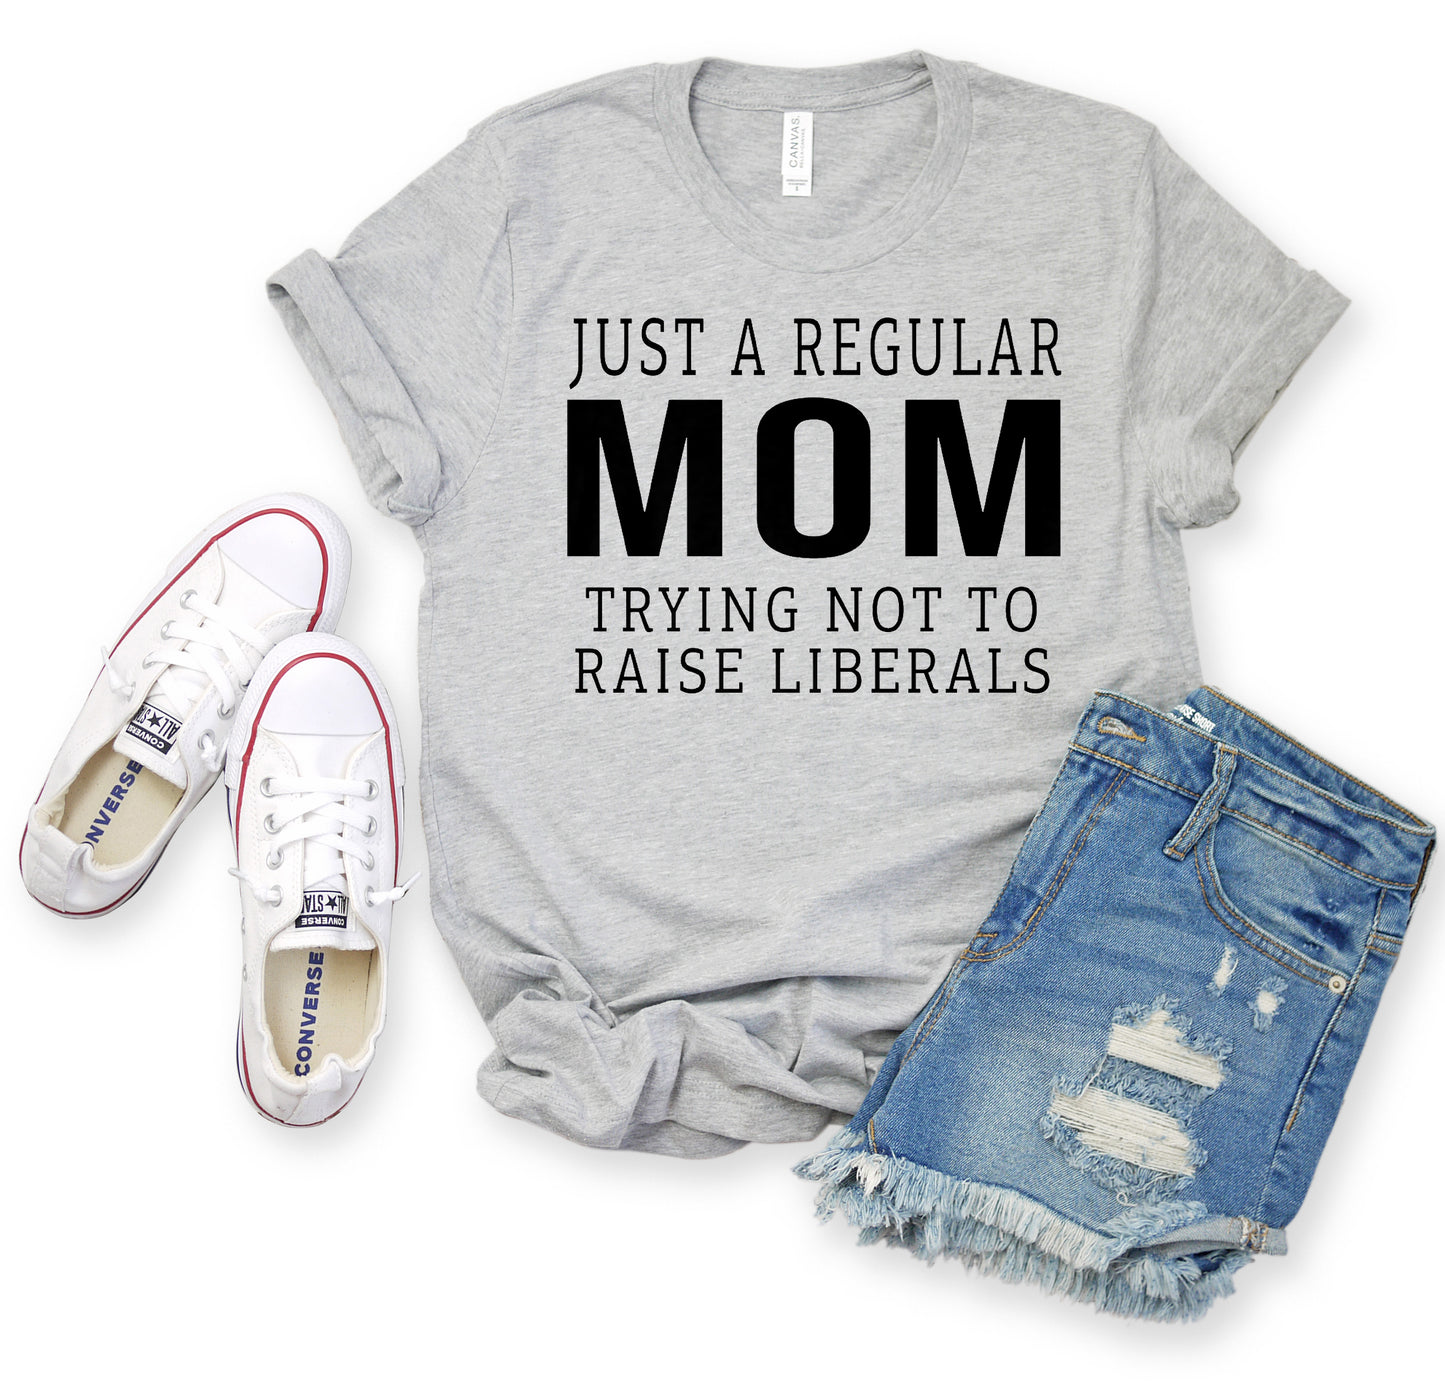 Just a mom trying not to raise liberals